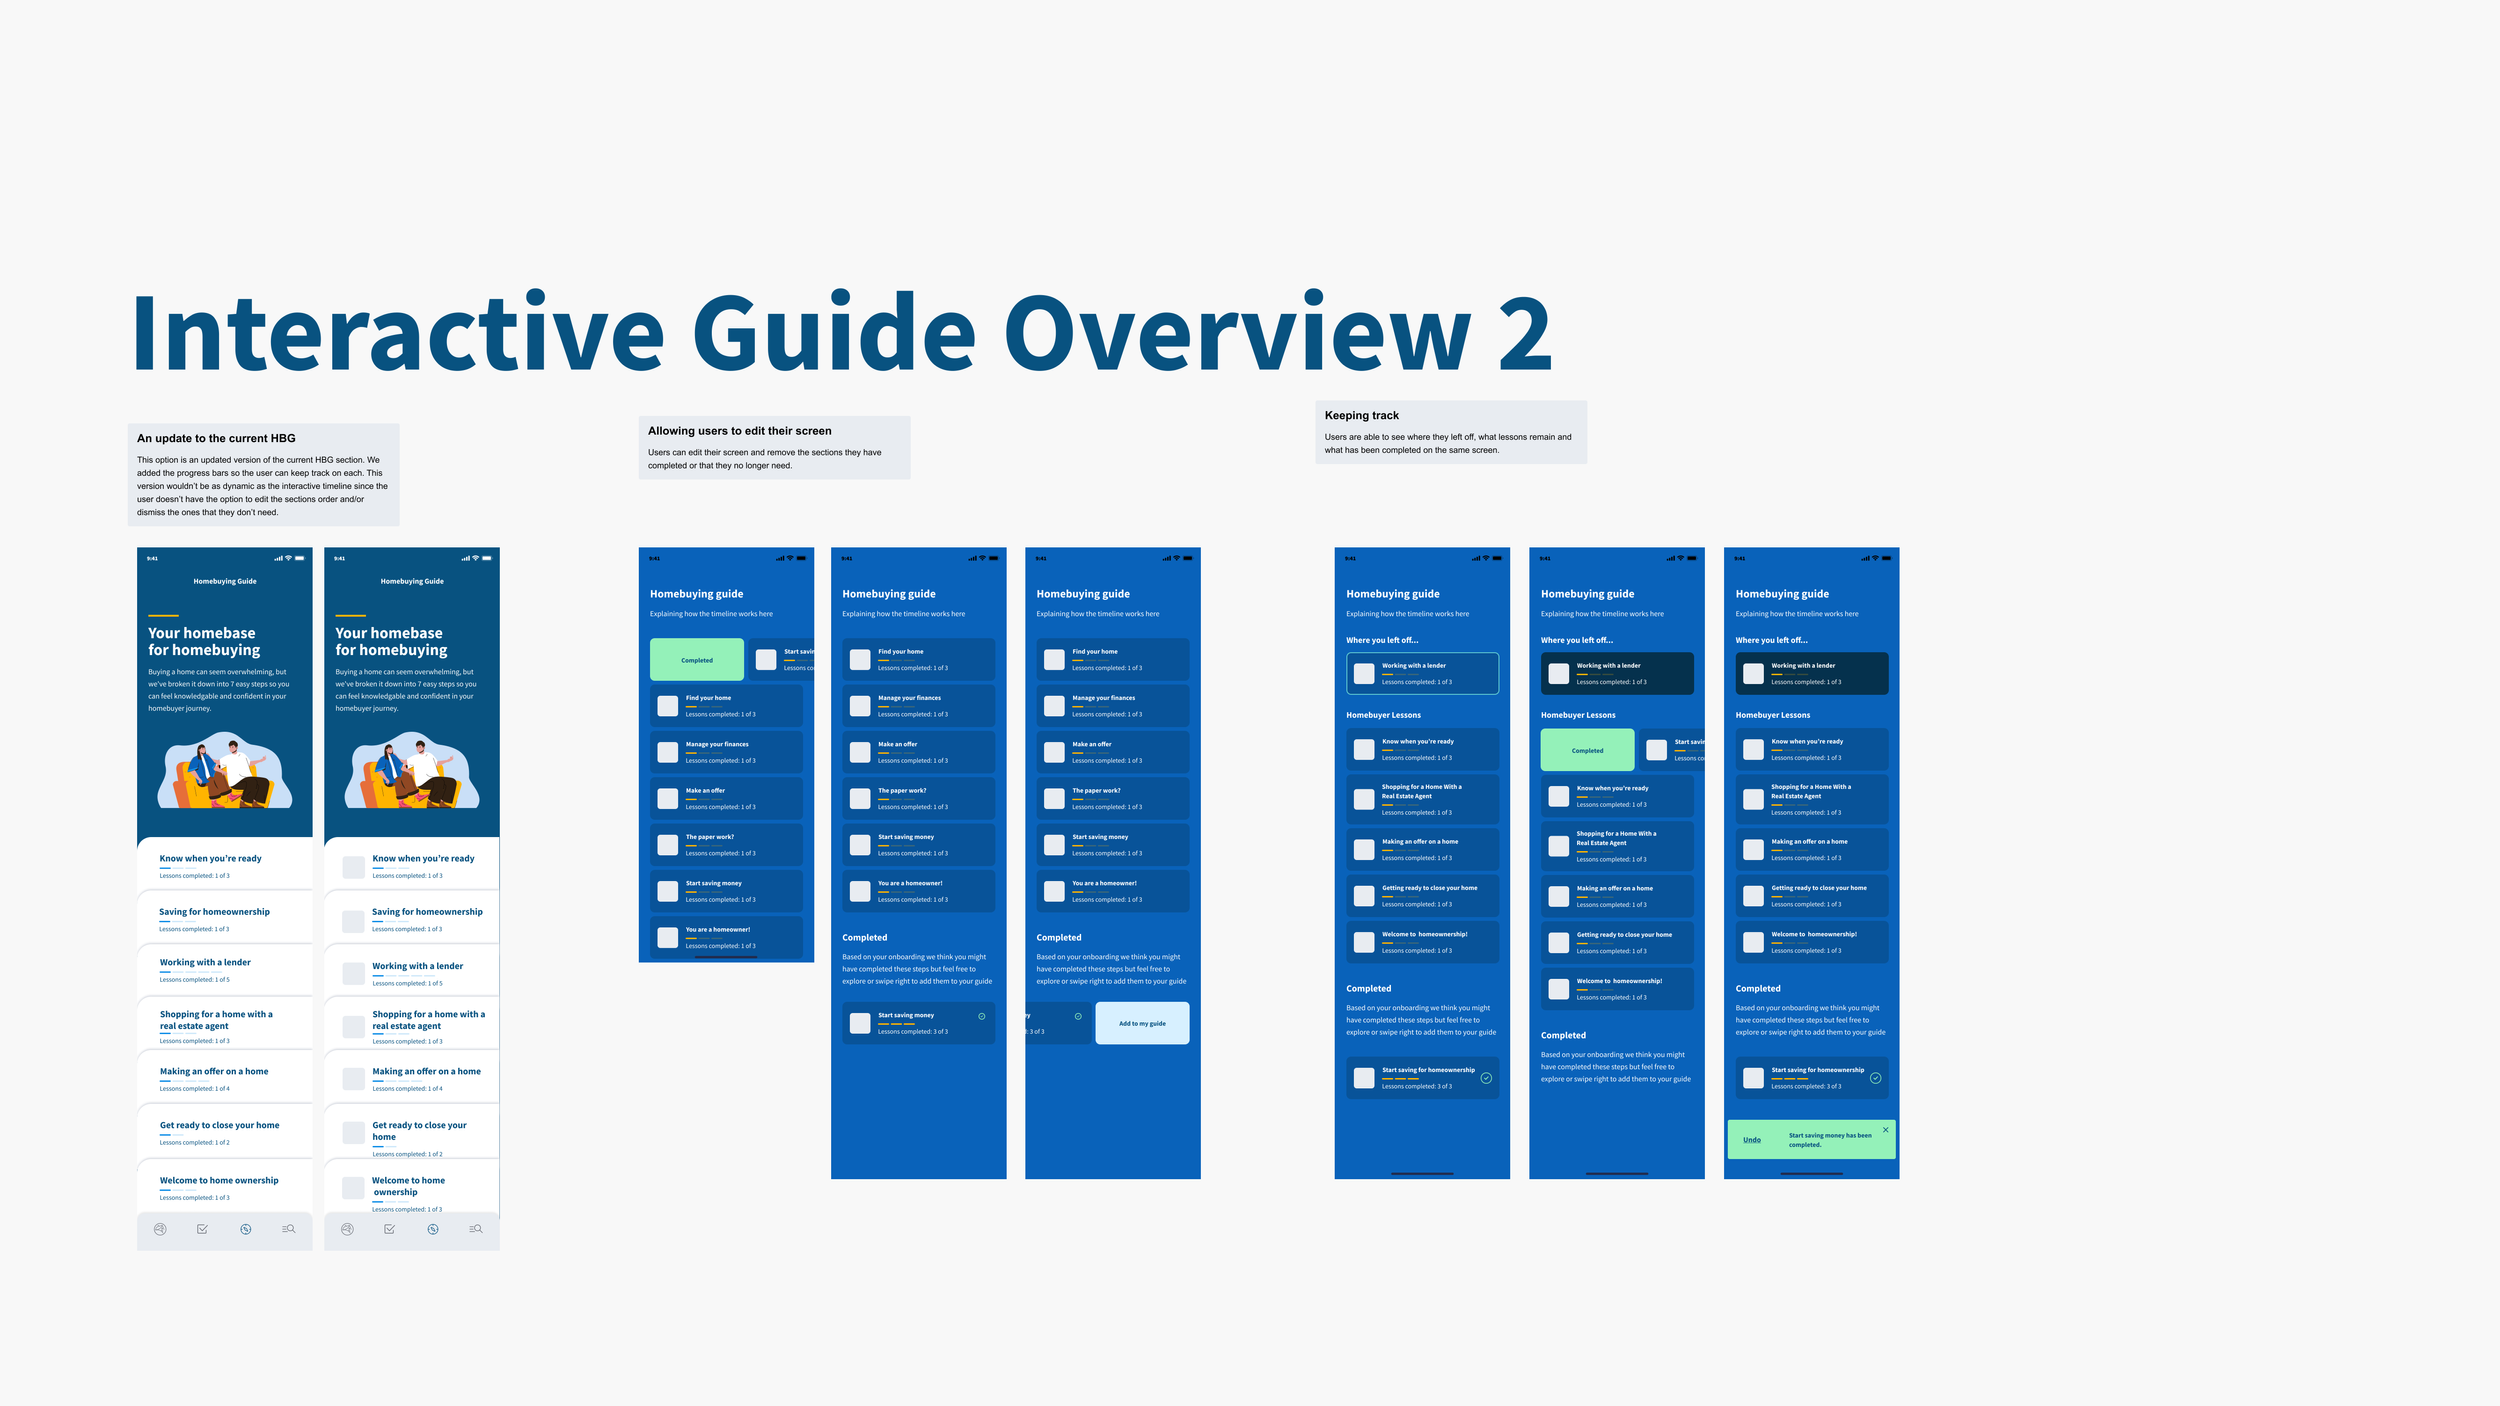 Interactive home guides@2x.png